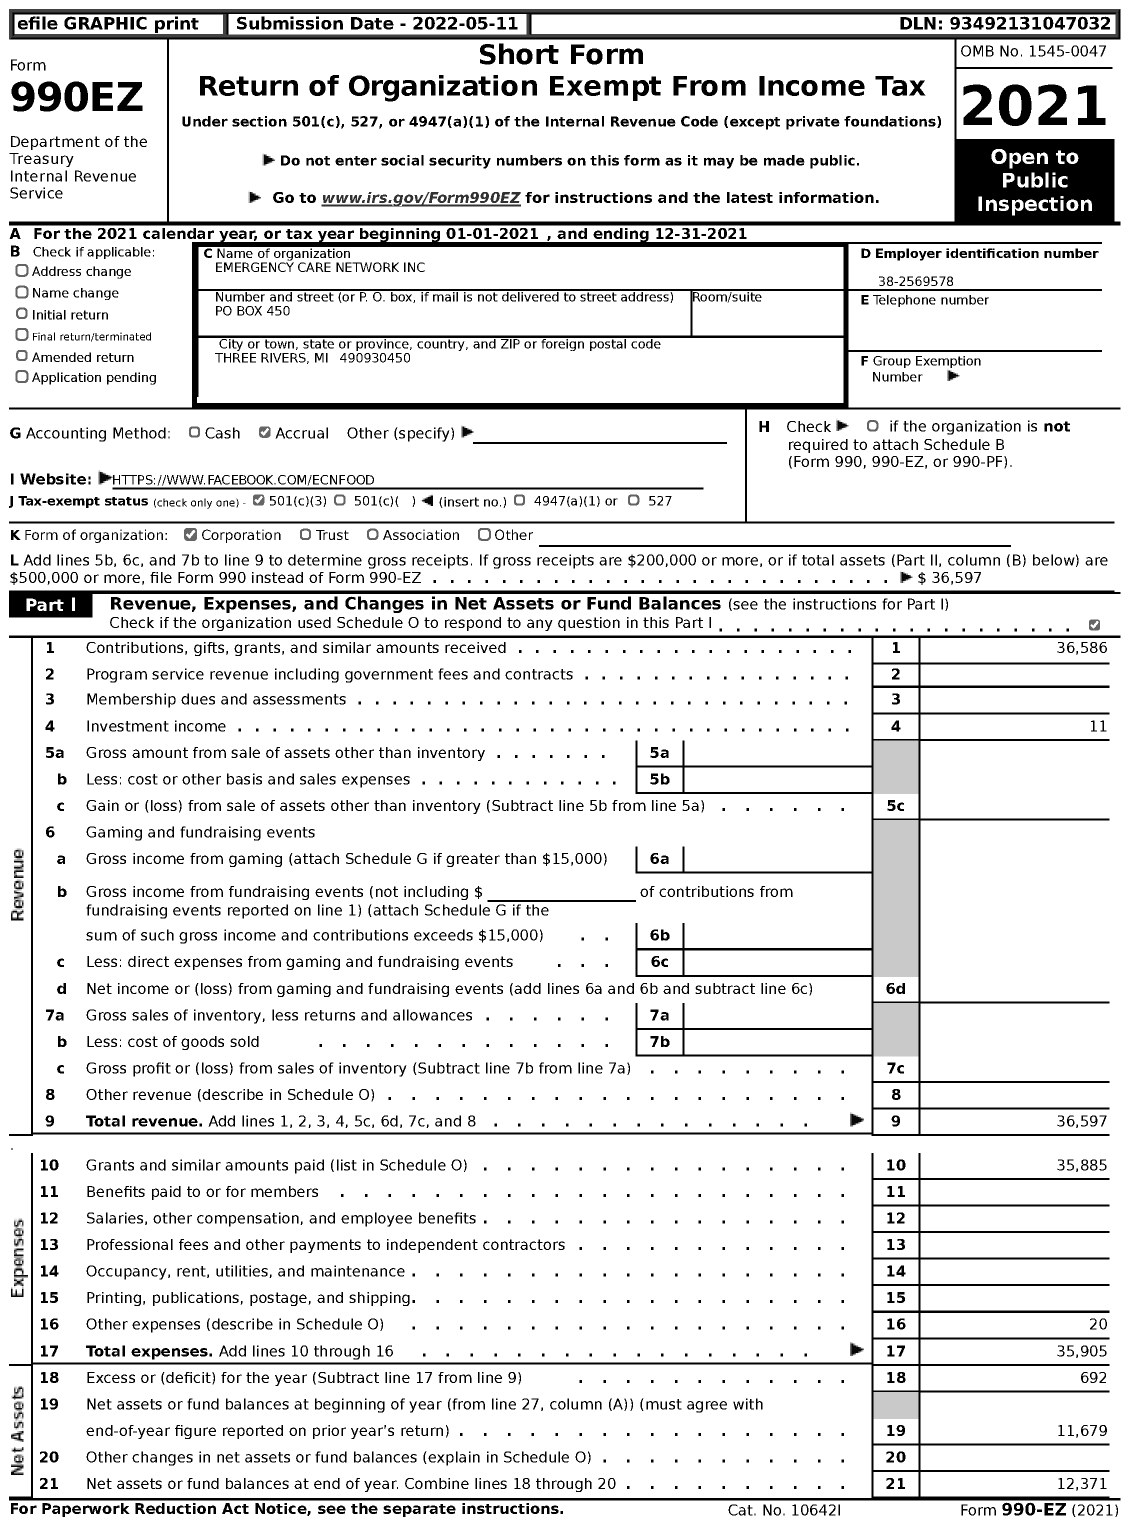 Image of first page of 2021 Form 990EZ for Emergency Care Network